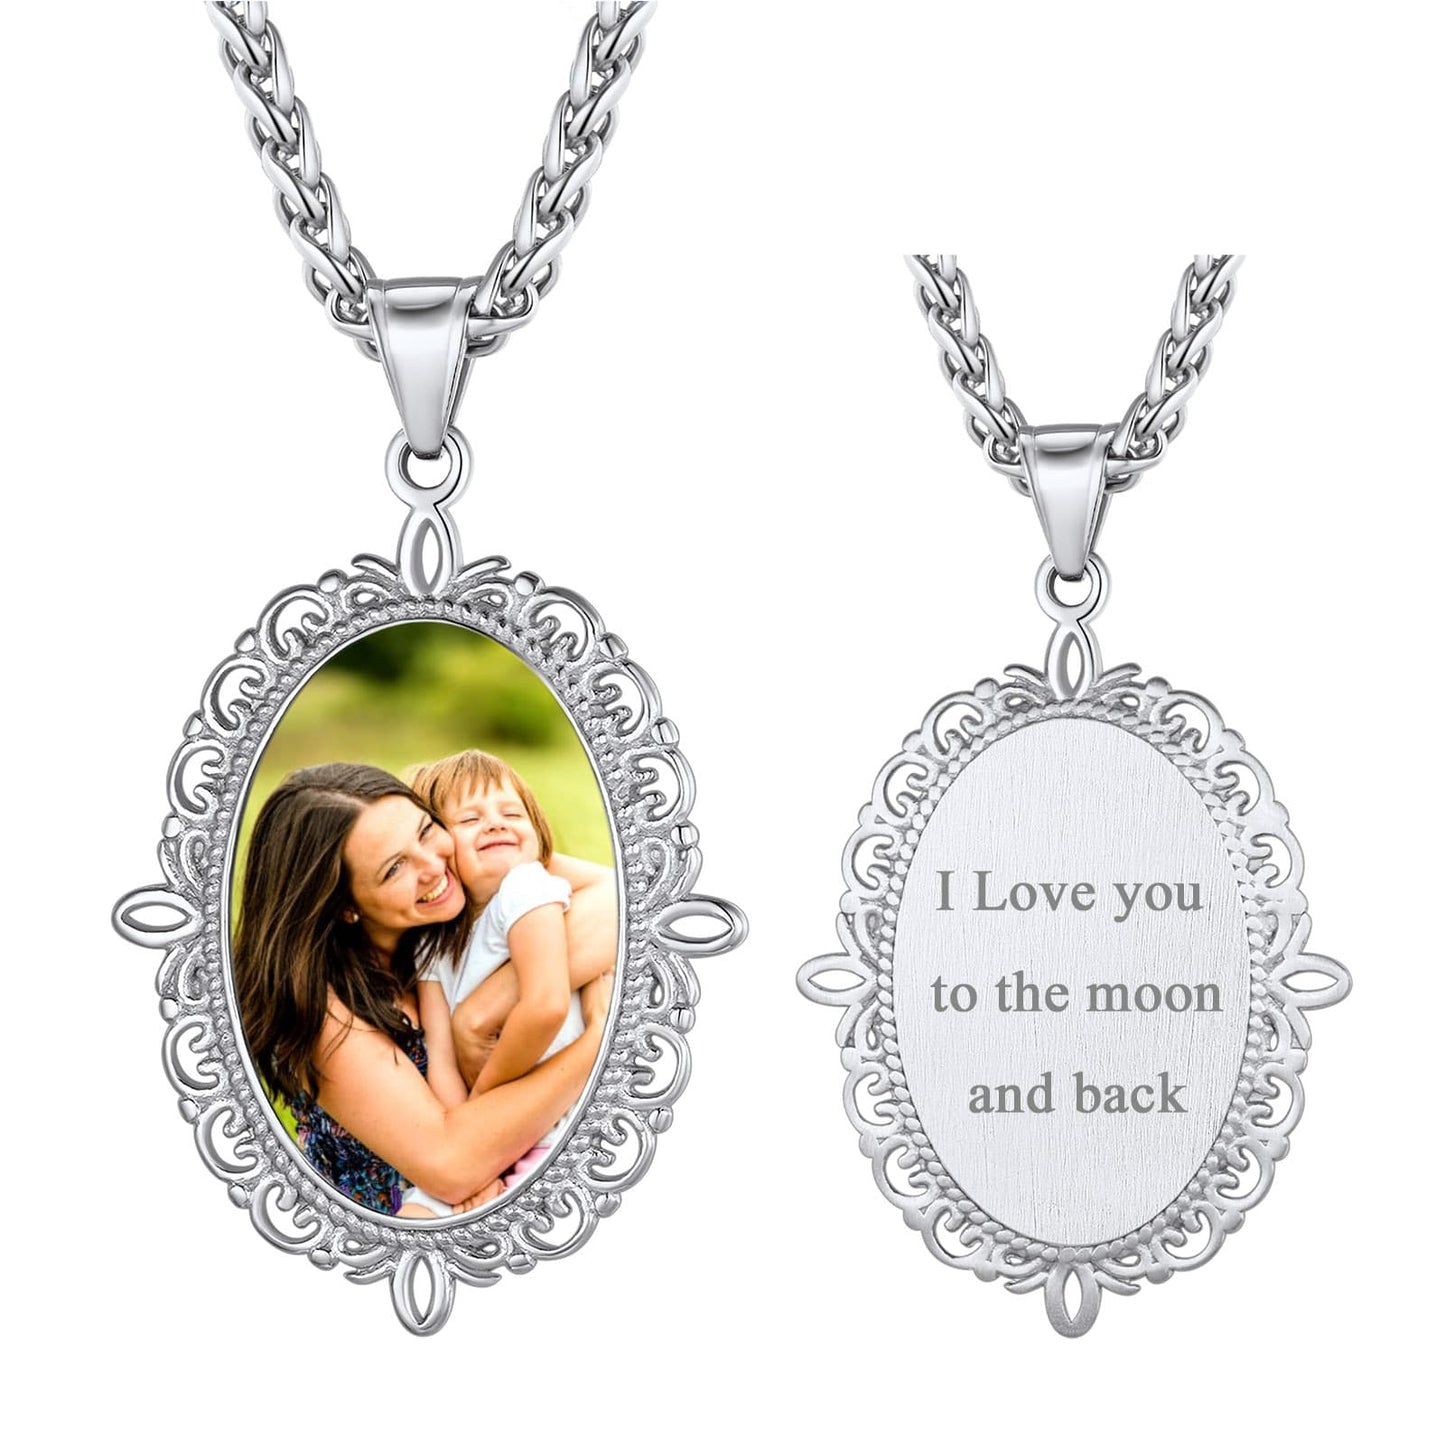 Birthstonesjewelry Personalized Oval Picture Necklace with Message Steel